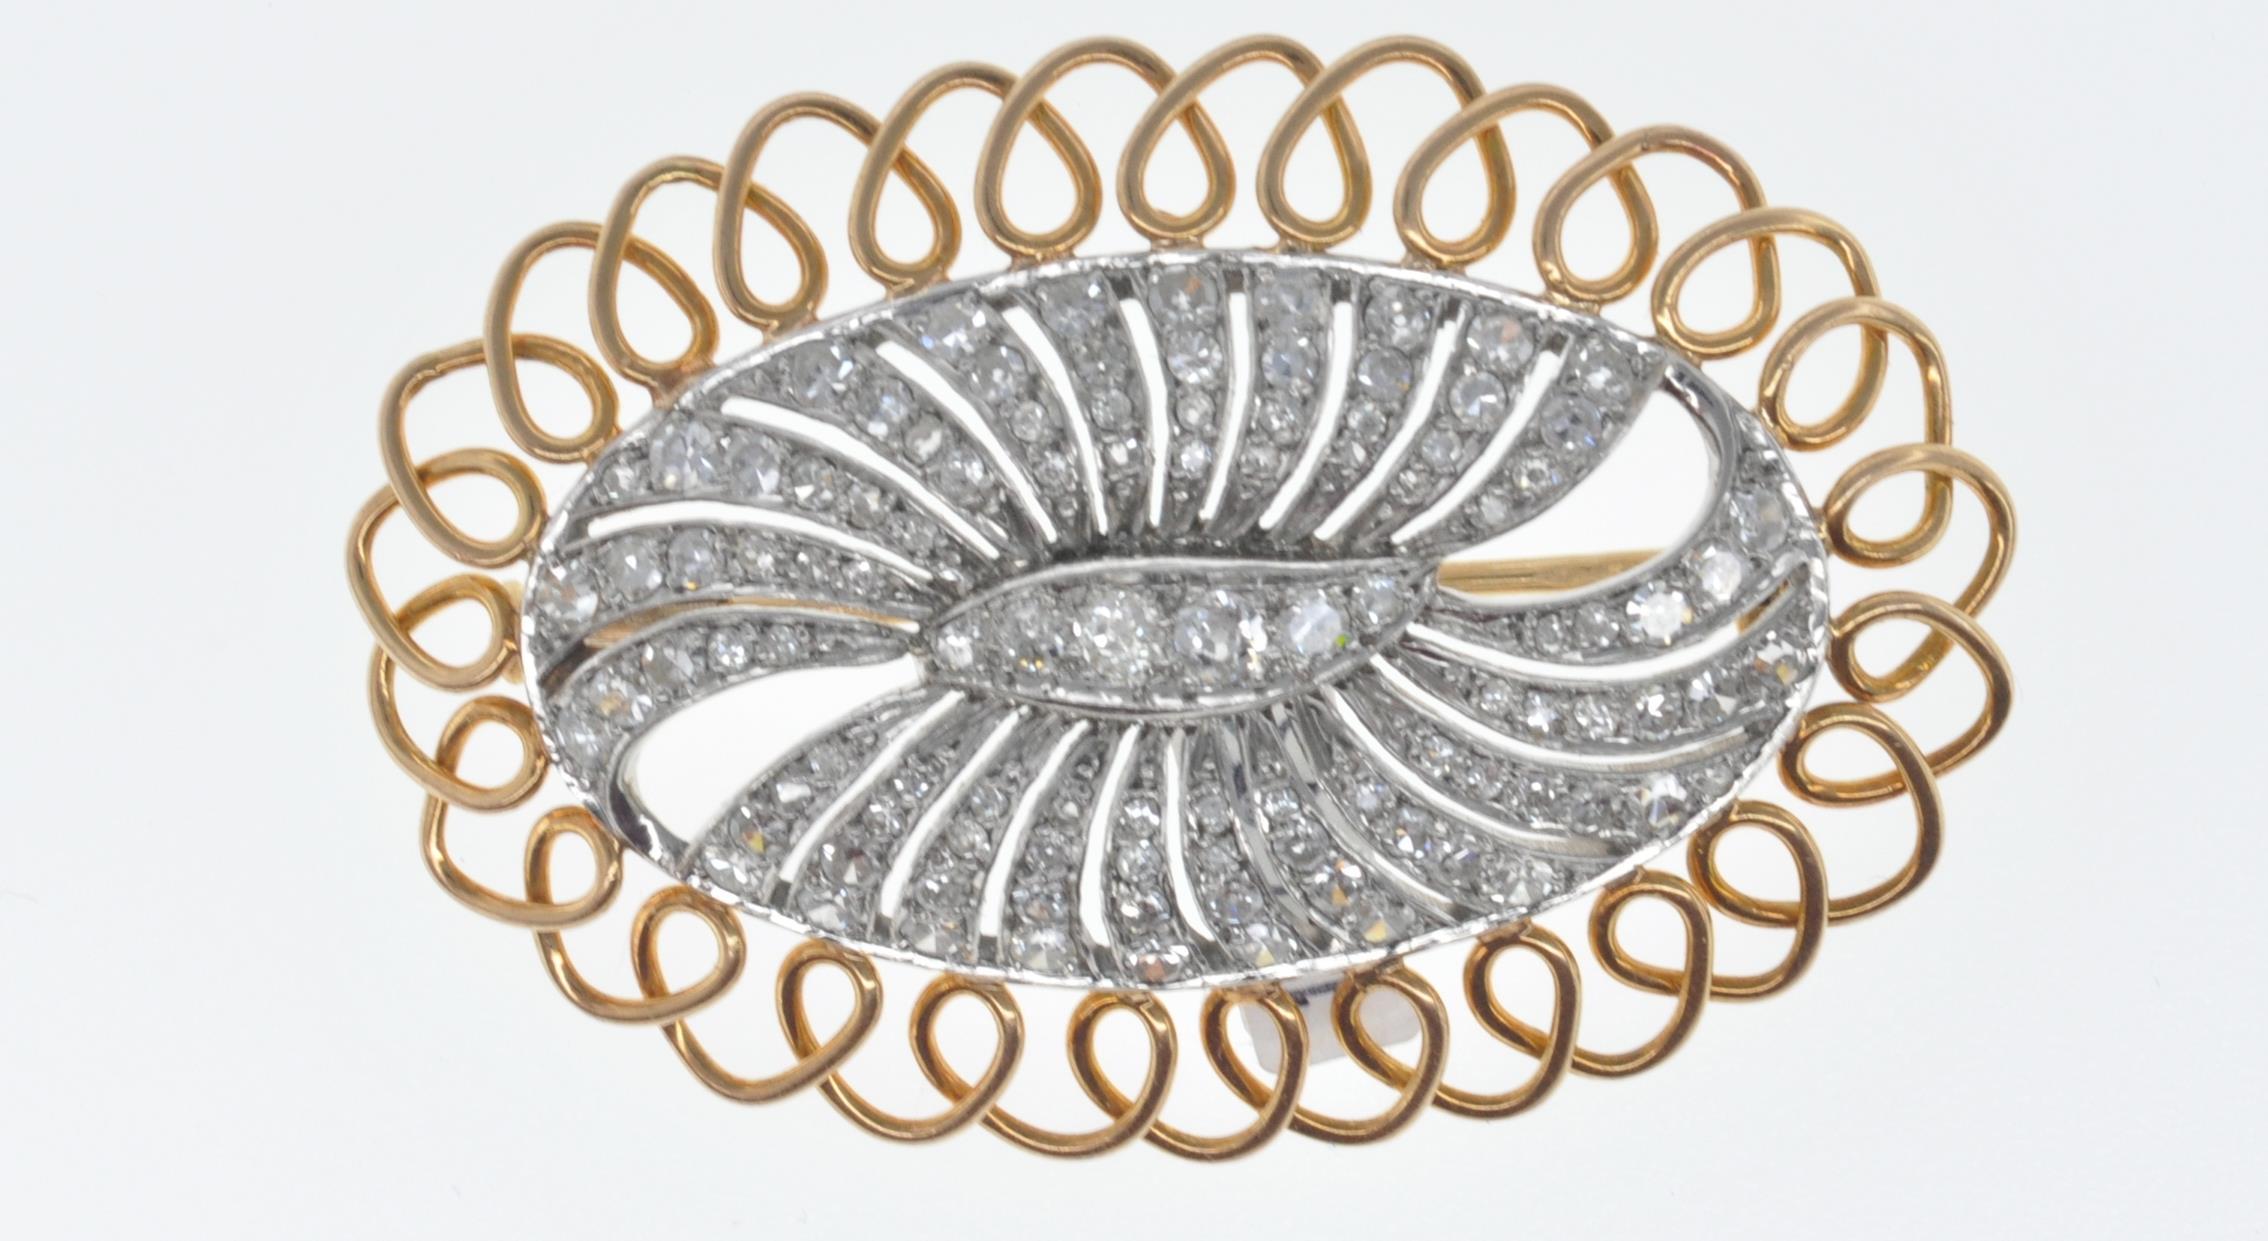 VINTAGE GOLD AND DIAMOND OVAL BROOCH - Image 3 of 6